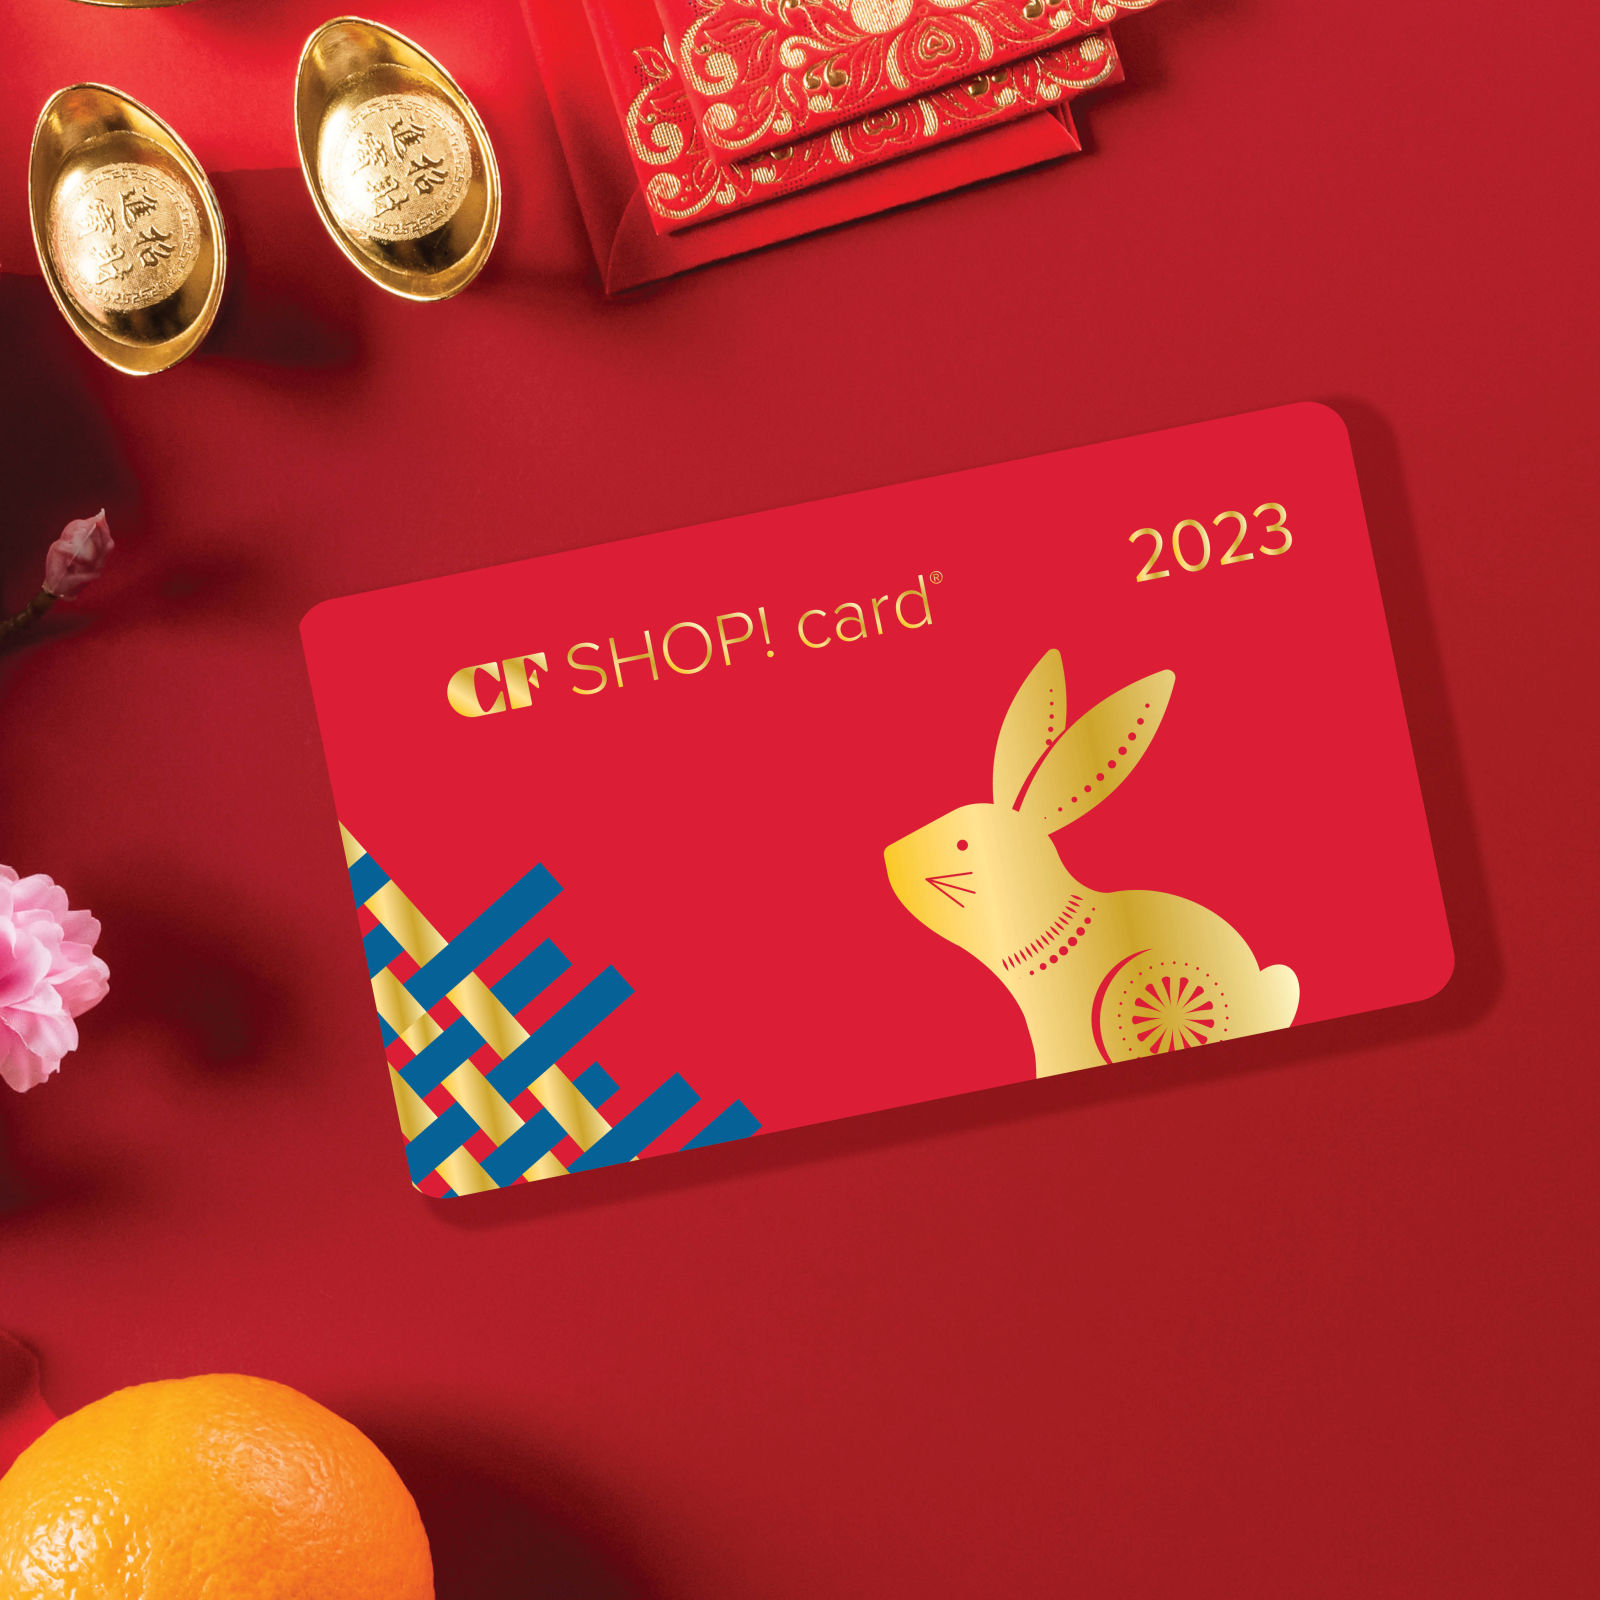 Receive up to a $328 bonus gift card when you purchase a CF SHOP! card® with UnionPay. 